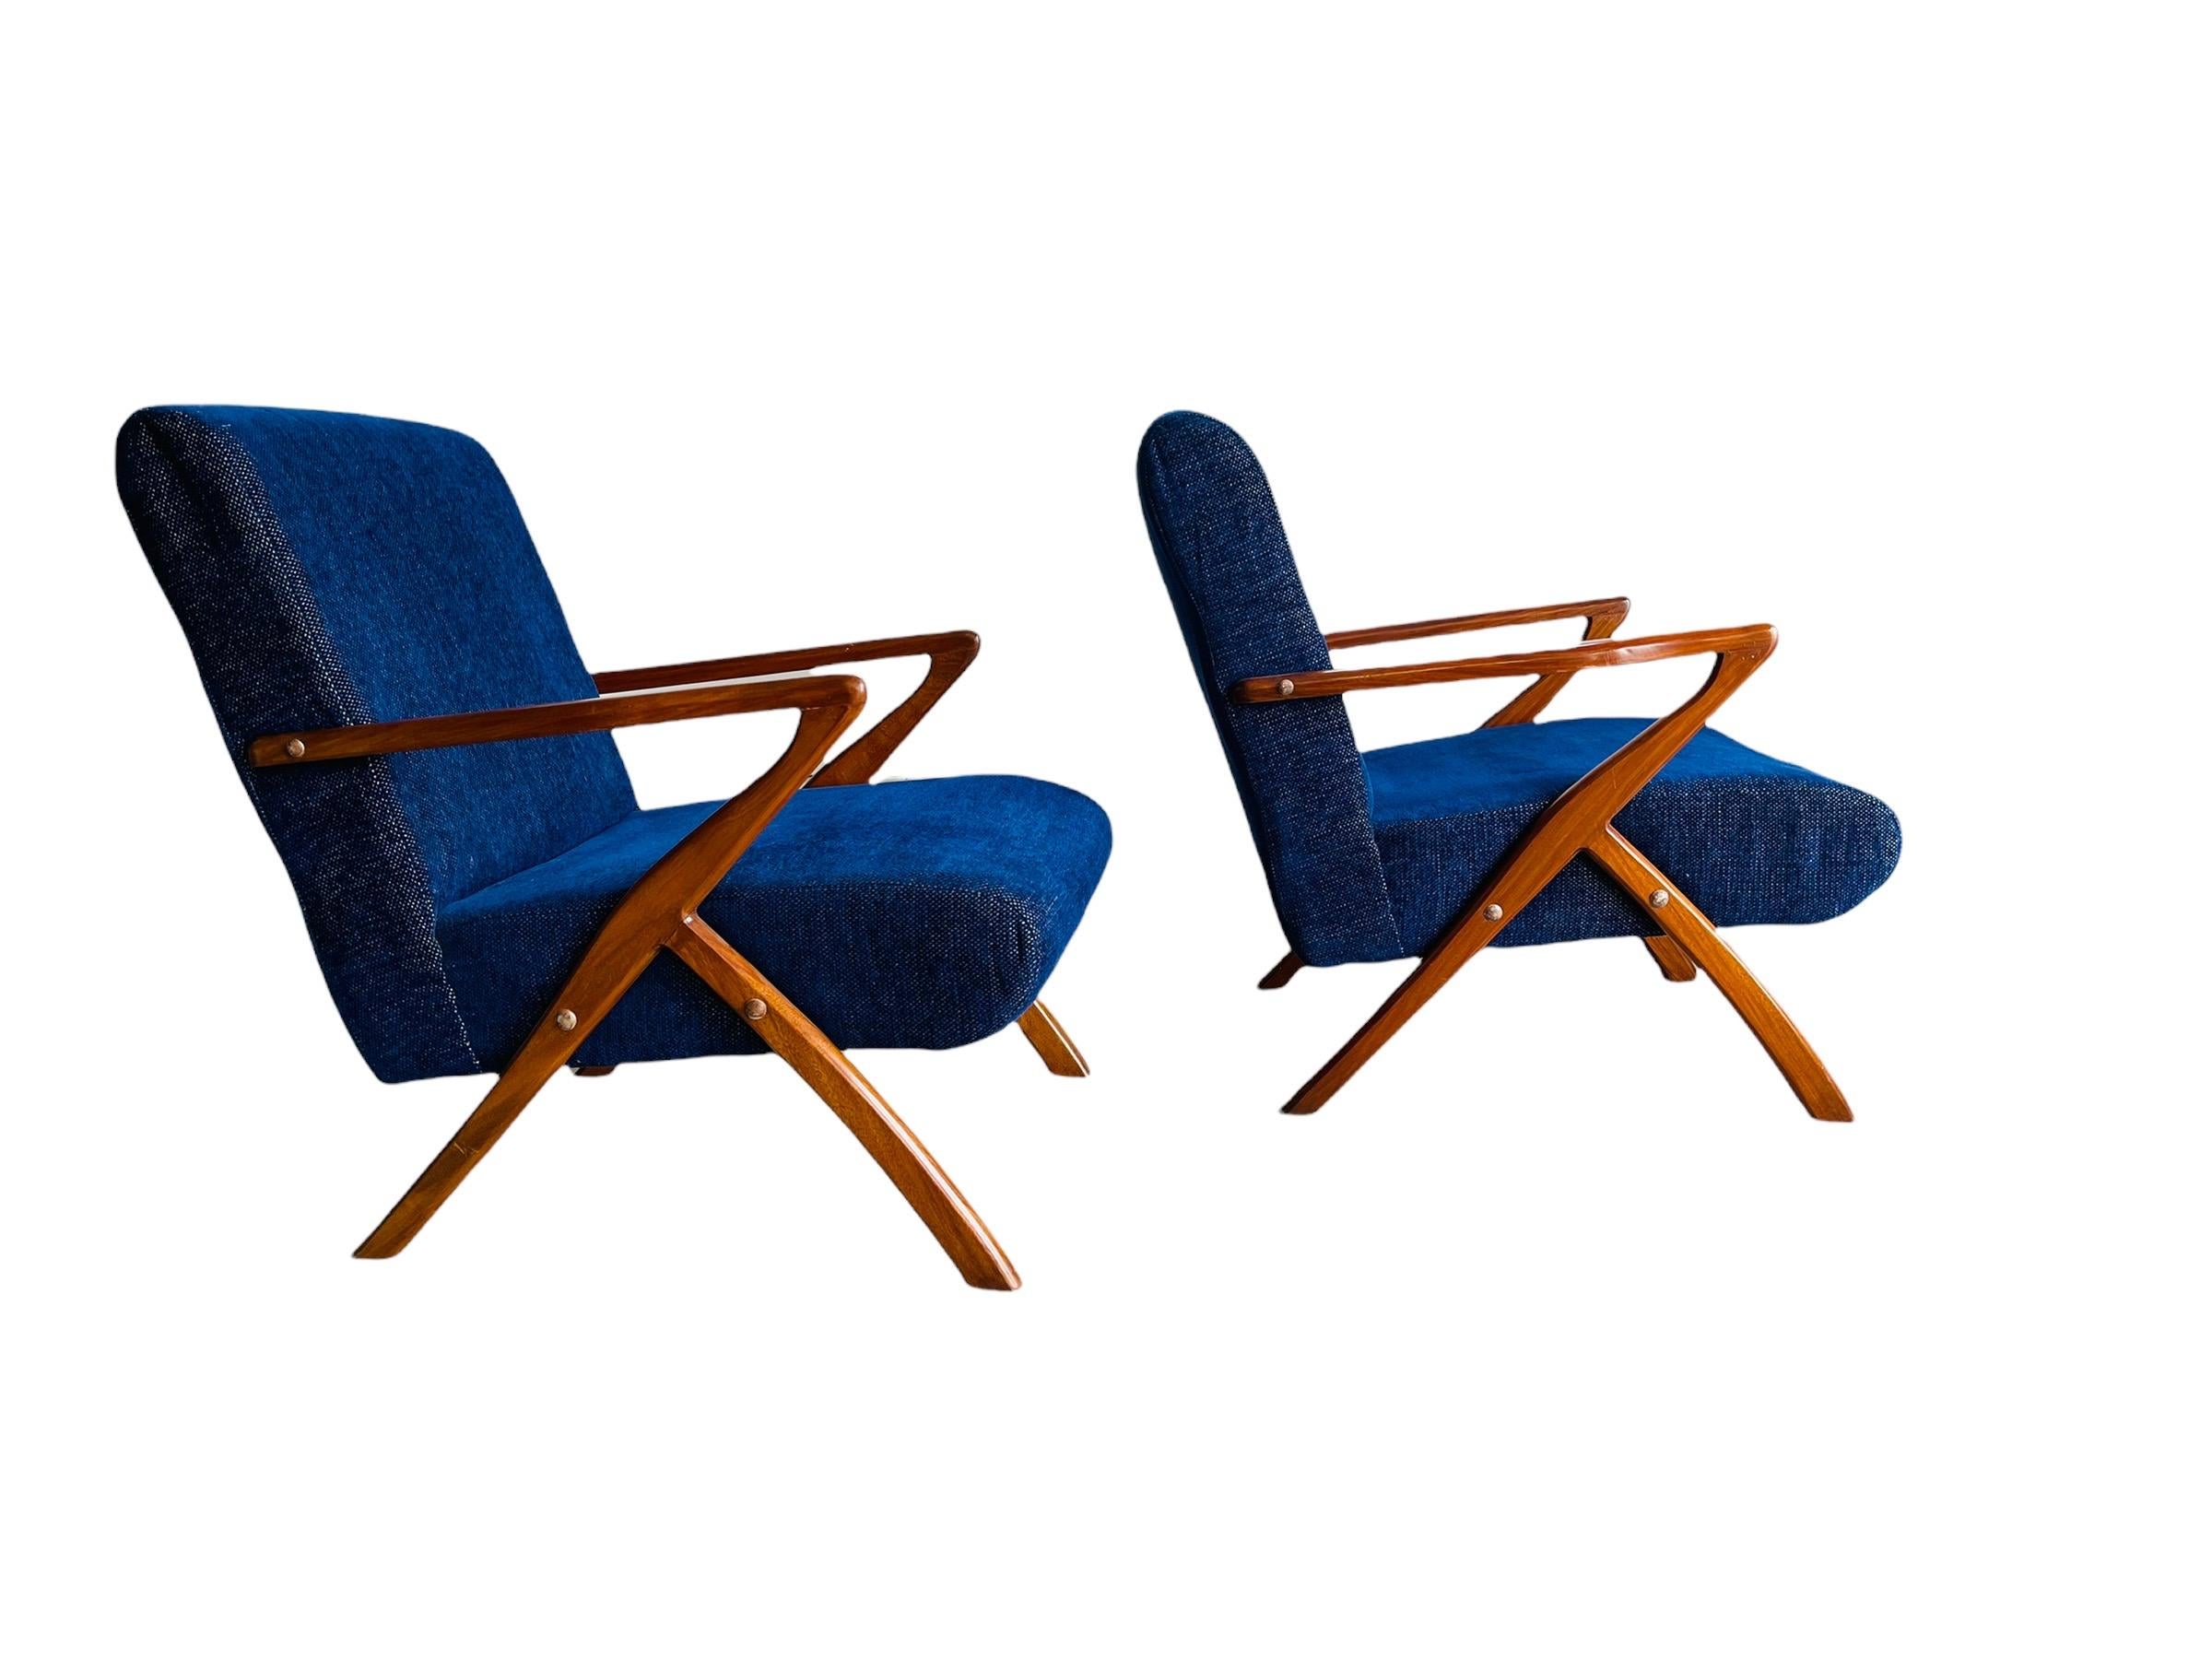 Here is a stunning Pair of Mid-Century Modern Selig Style Z chair with walnut frame. The chairs have a beautiful walnut frame with dark-blue/ midnight blue fabric. The chairs are very stylish and comfy. The chair are in good vintage condition with